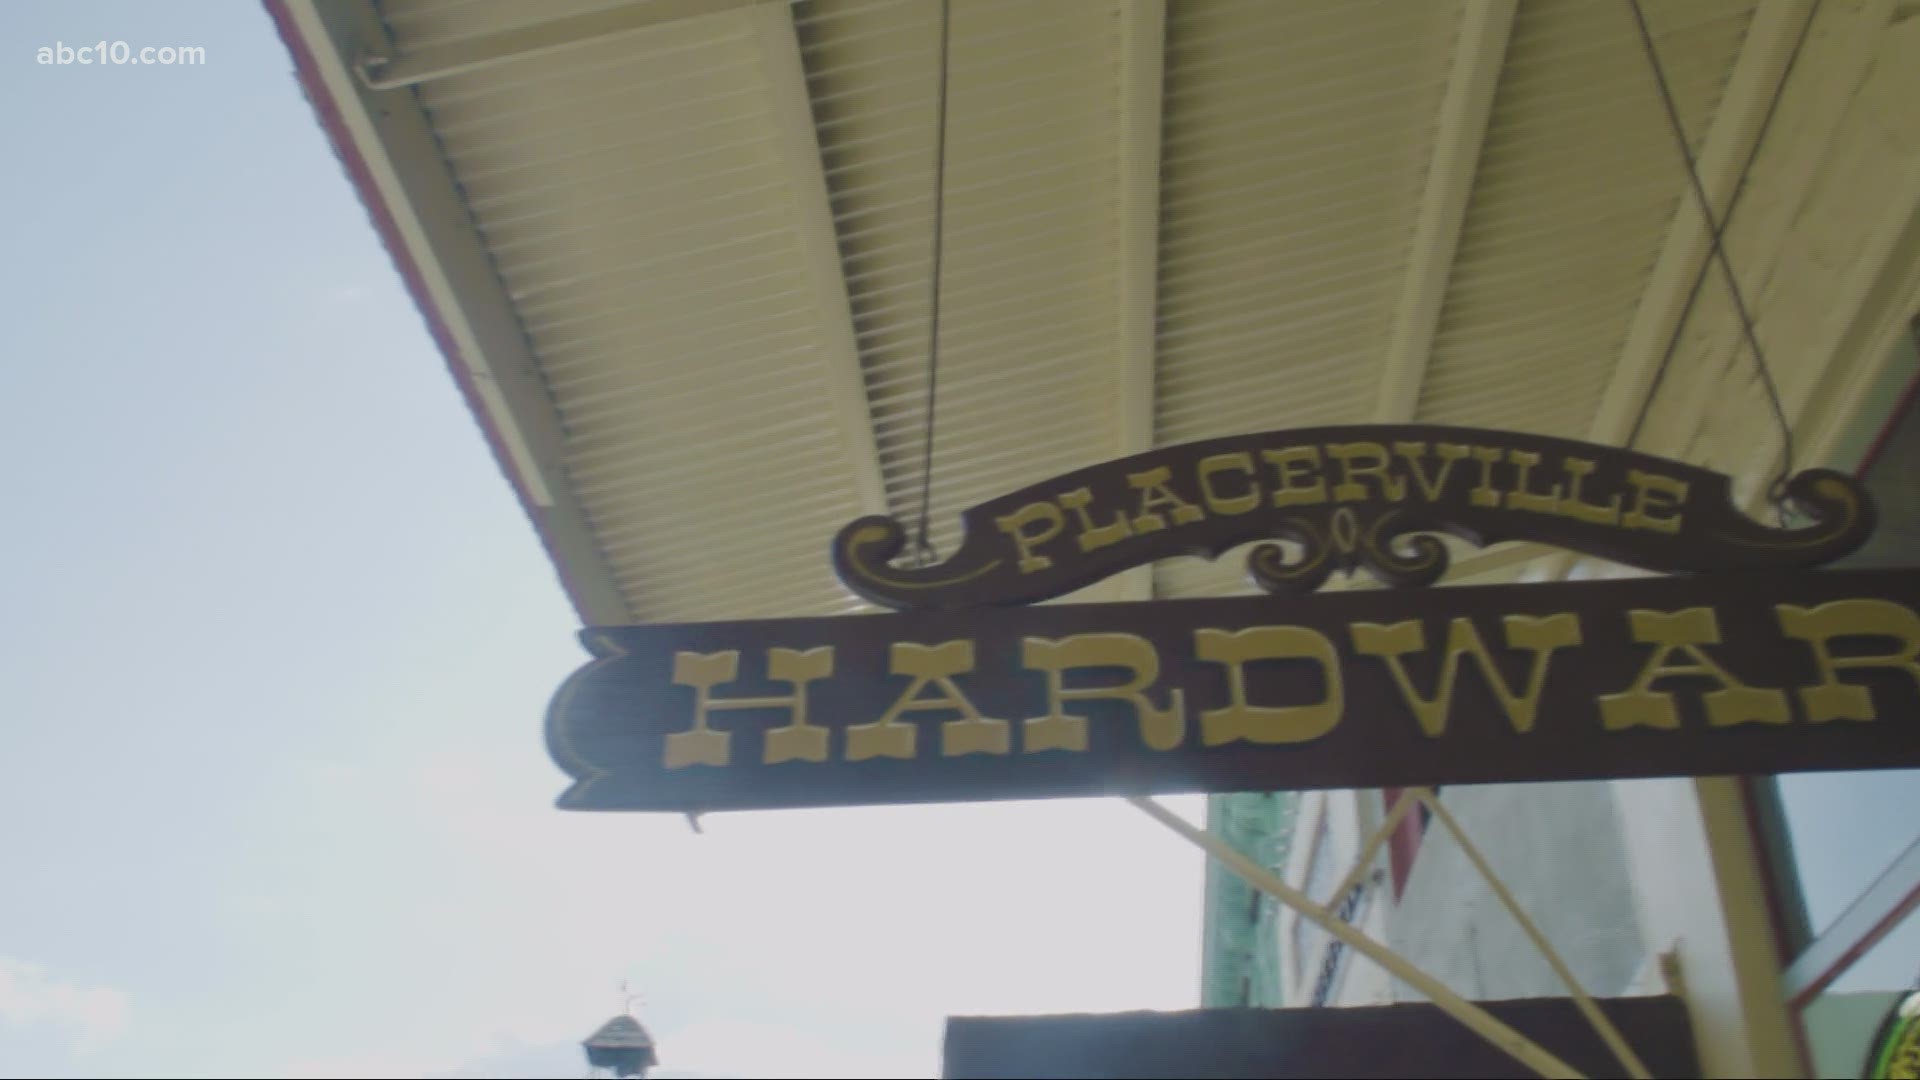 Placerville Hardware is nearly 170 years old and survived the 1918 flu pandemic. Sitting right on Placerville's historic Main Street, it's going through another one.